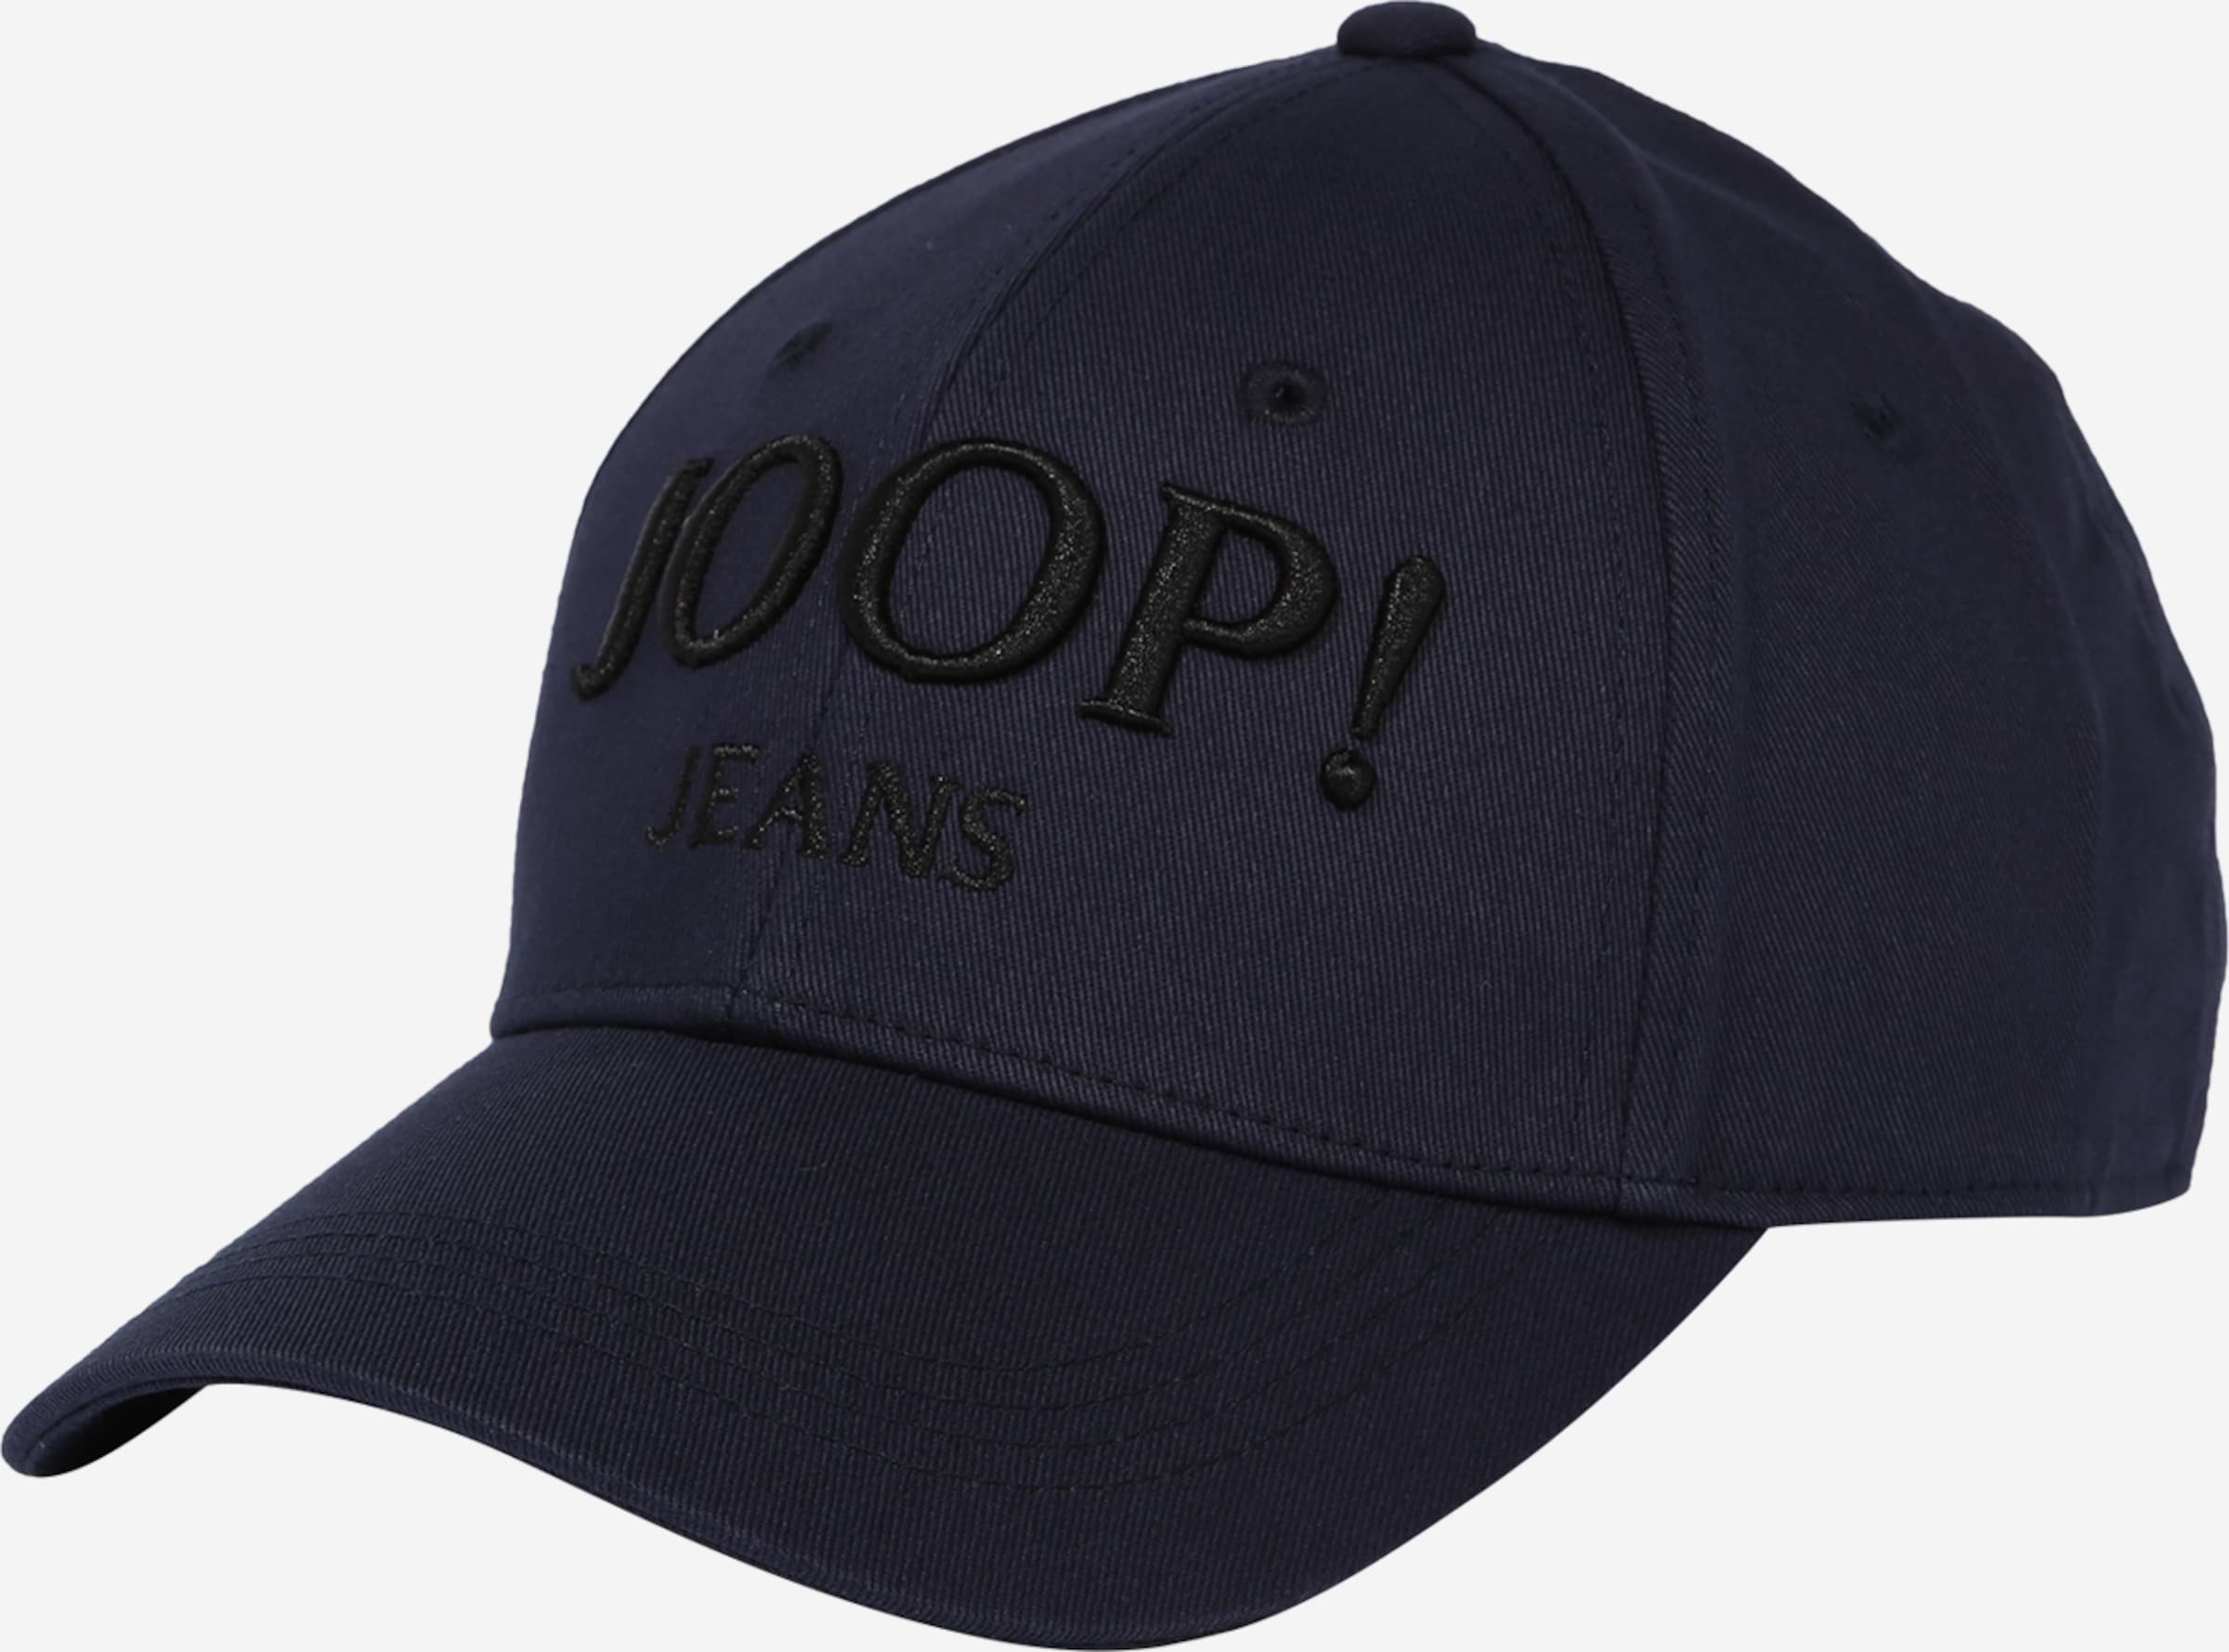 JOOP! Jeans Cap \'Markos\' in Navy | ABOUT YOU